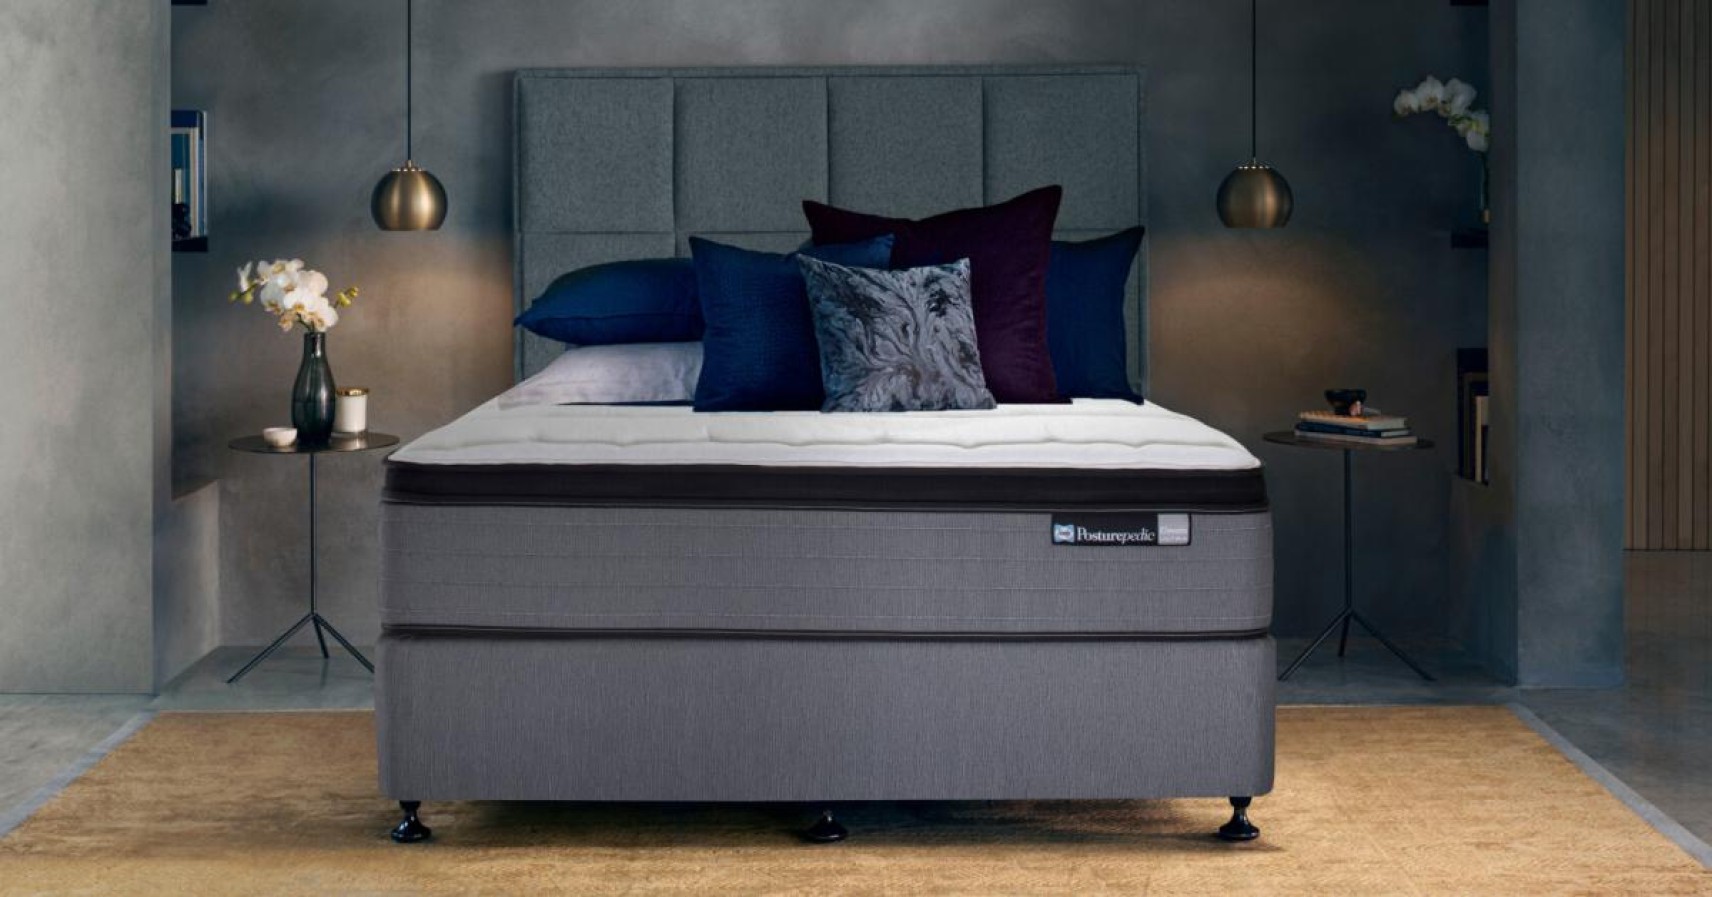 Moody bedroom with dark grey upholstered bed